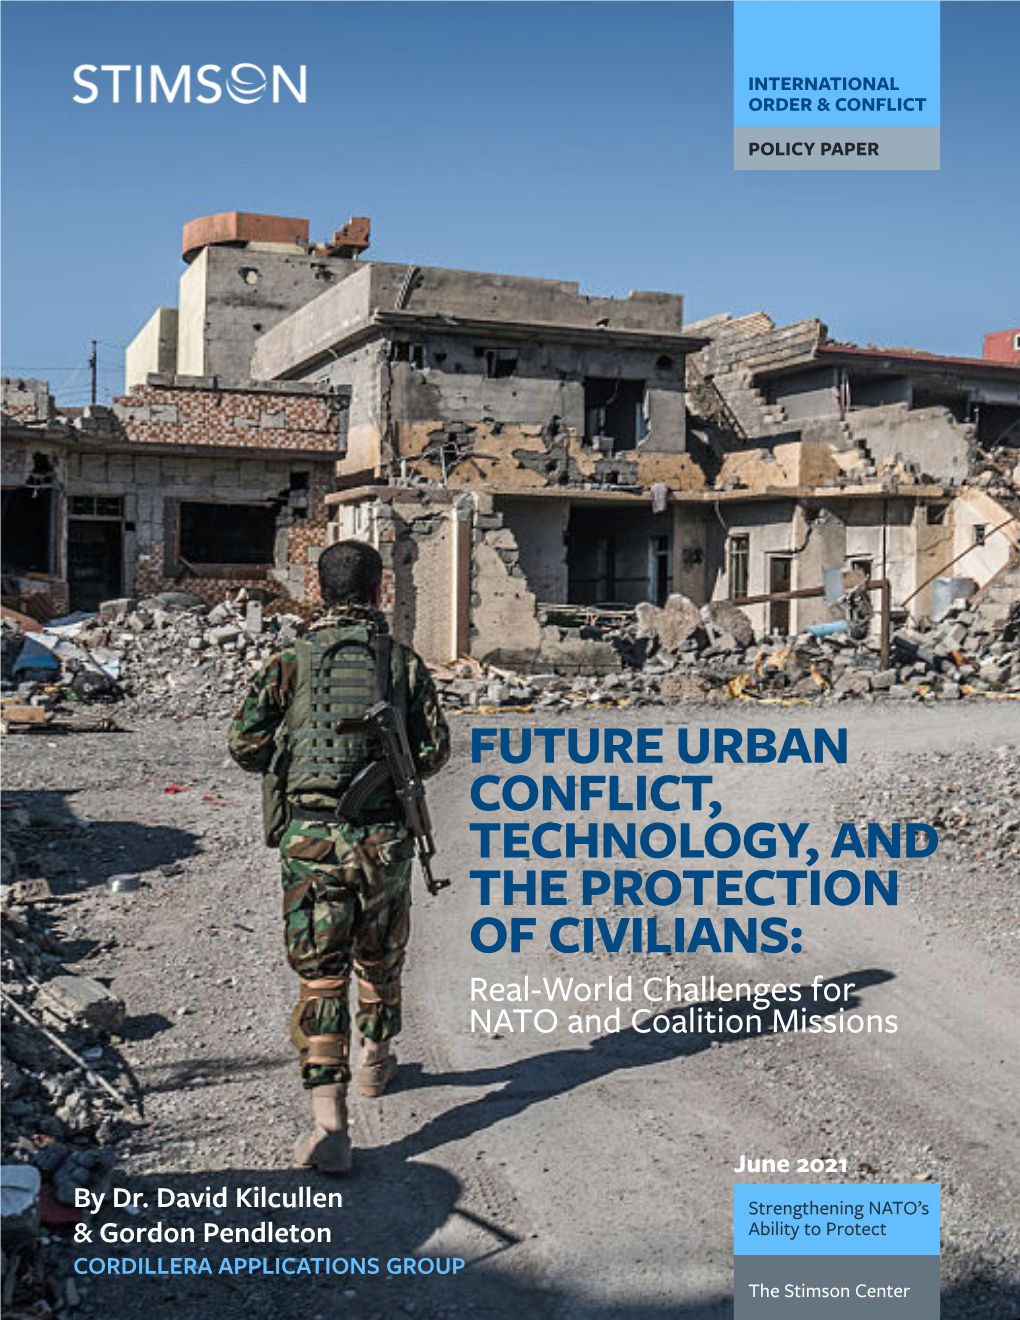 FUTURE URBAN CONFLICT, TECHNOLOGY, and the PROTECTION of CIVILIANS: Real-World Challenges for NATO and Coalition Missions